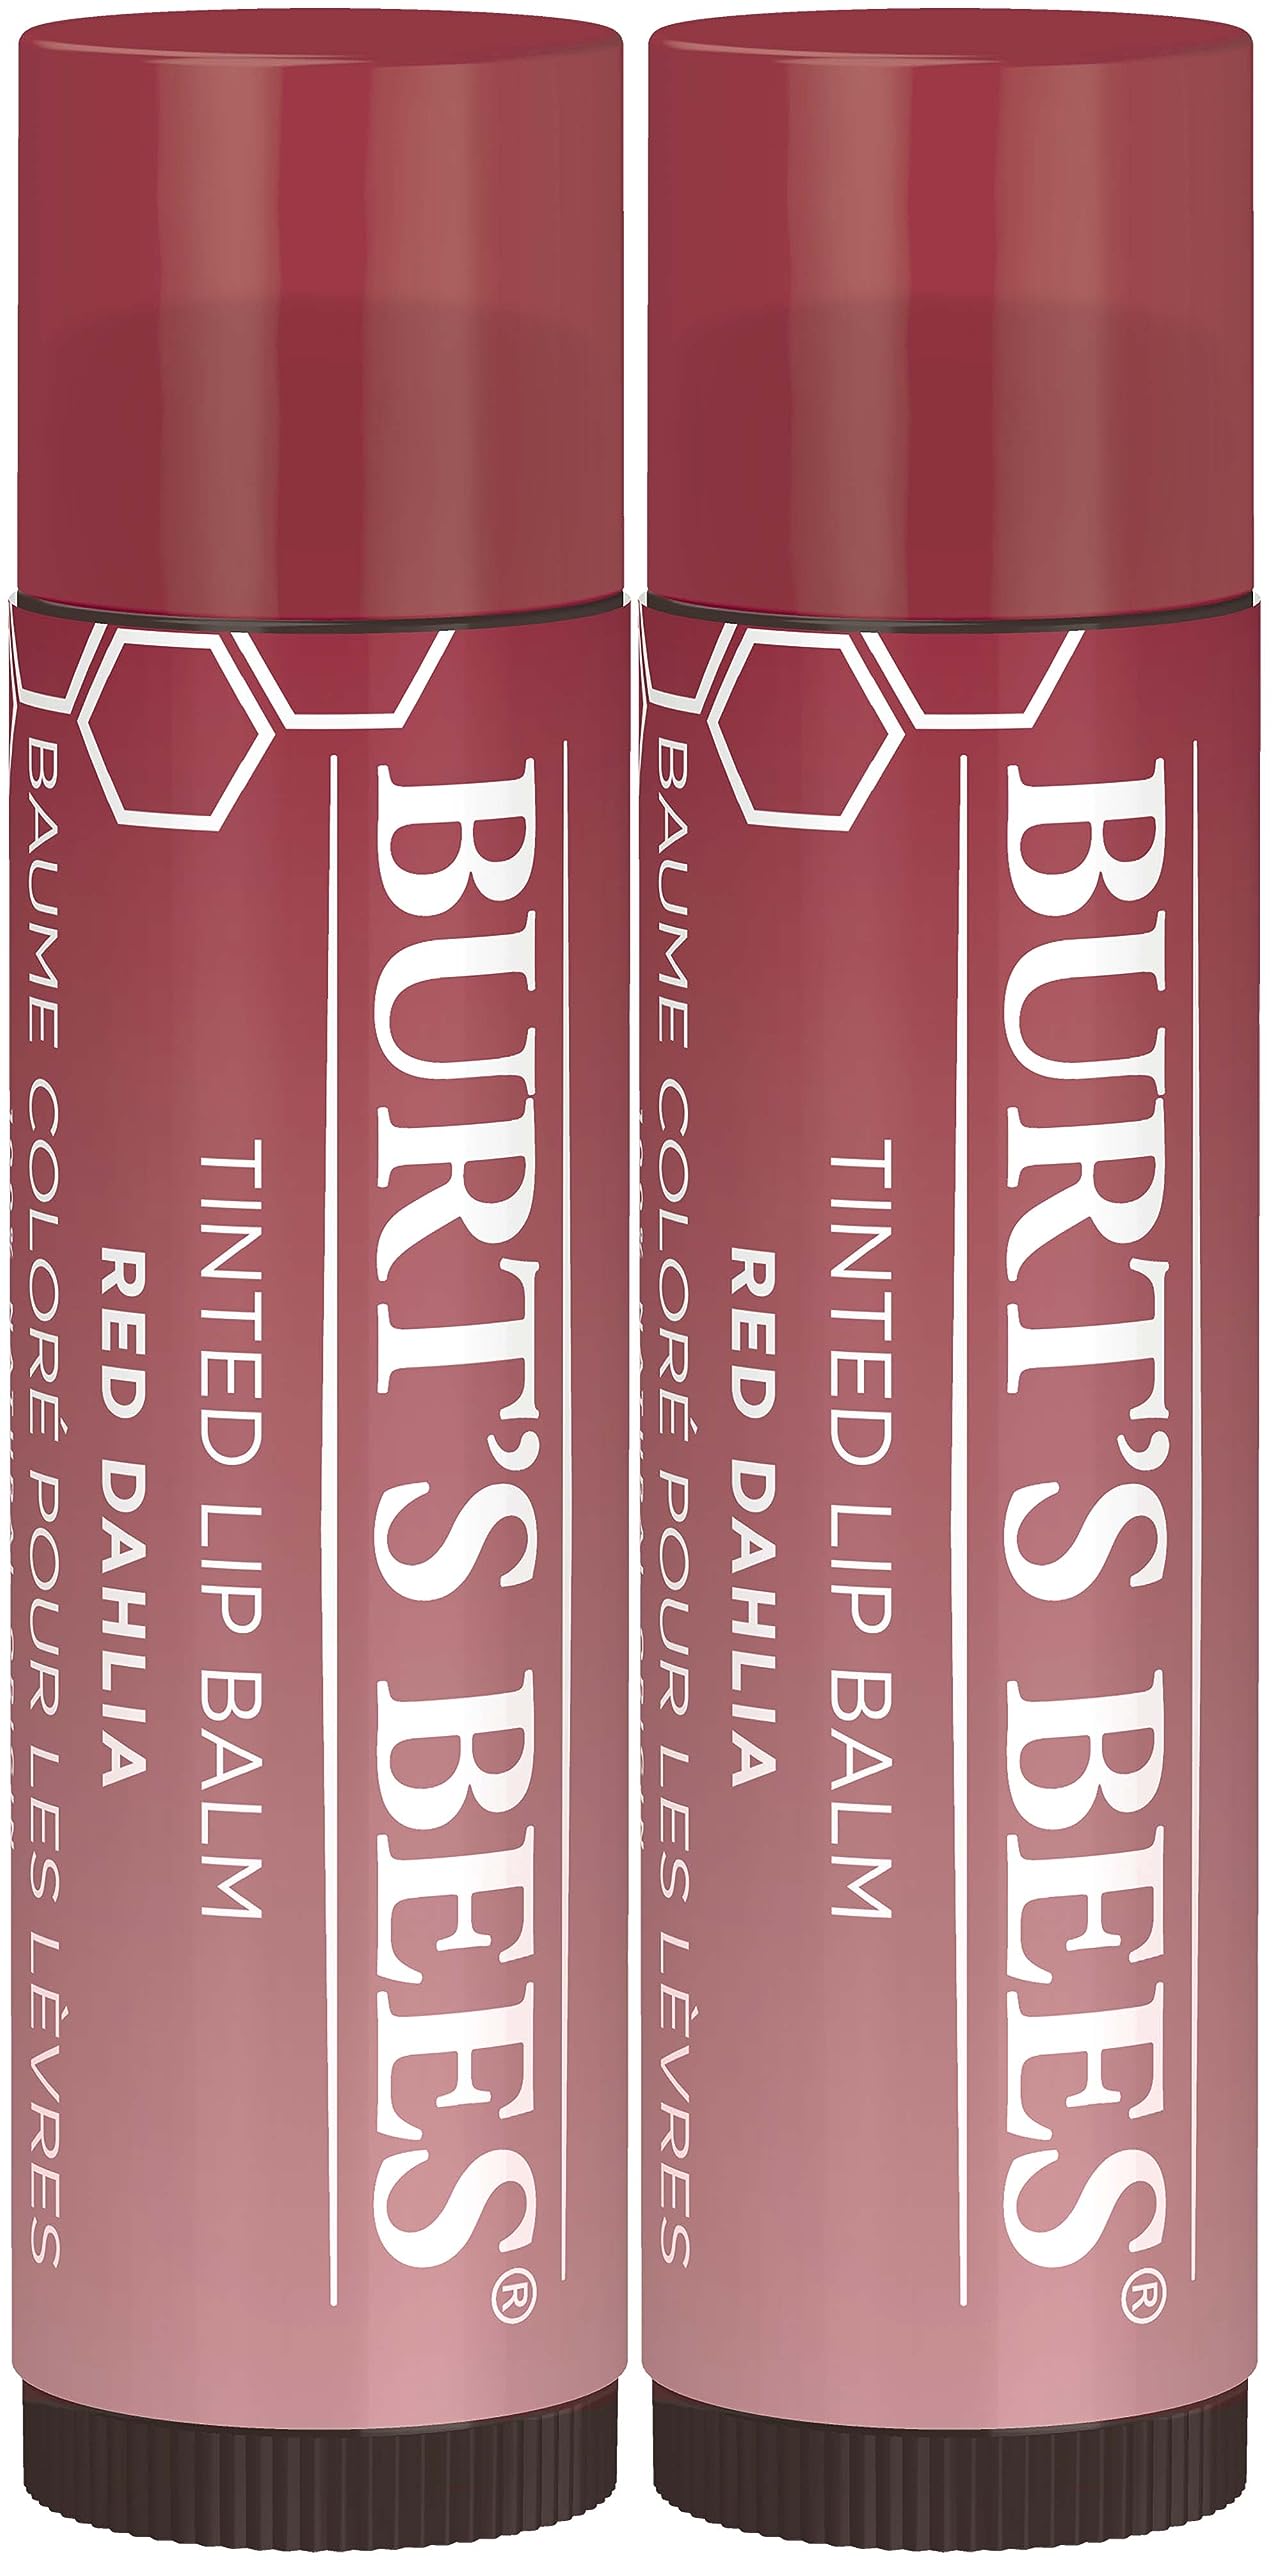 Burt's Bees Lip Balm, Tinted Moisturizing Lip Care for Women, 100% Natural, with Shea Butter, Red Dahlia (2 Pack)